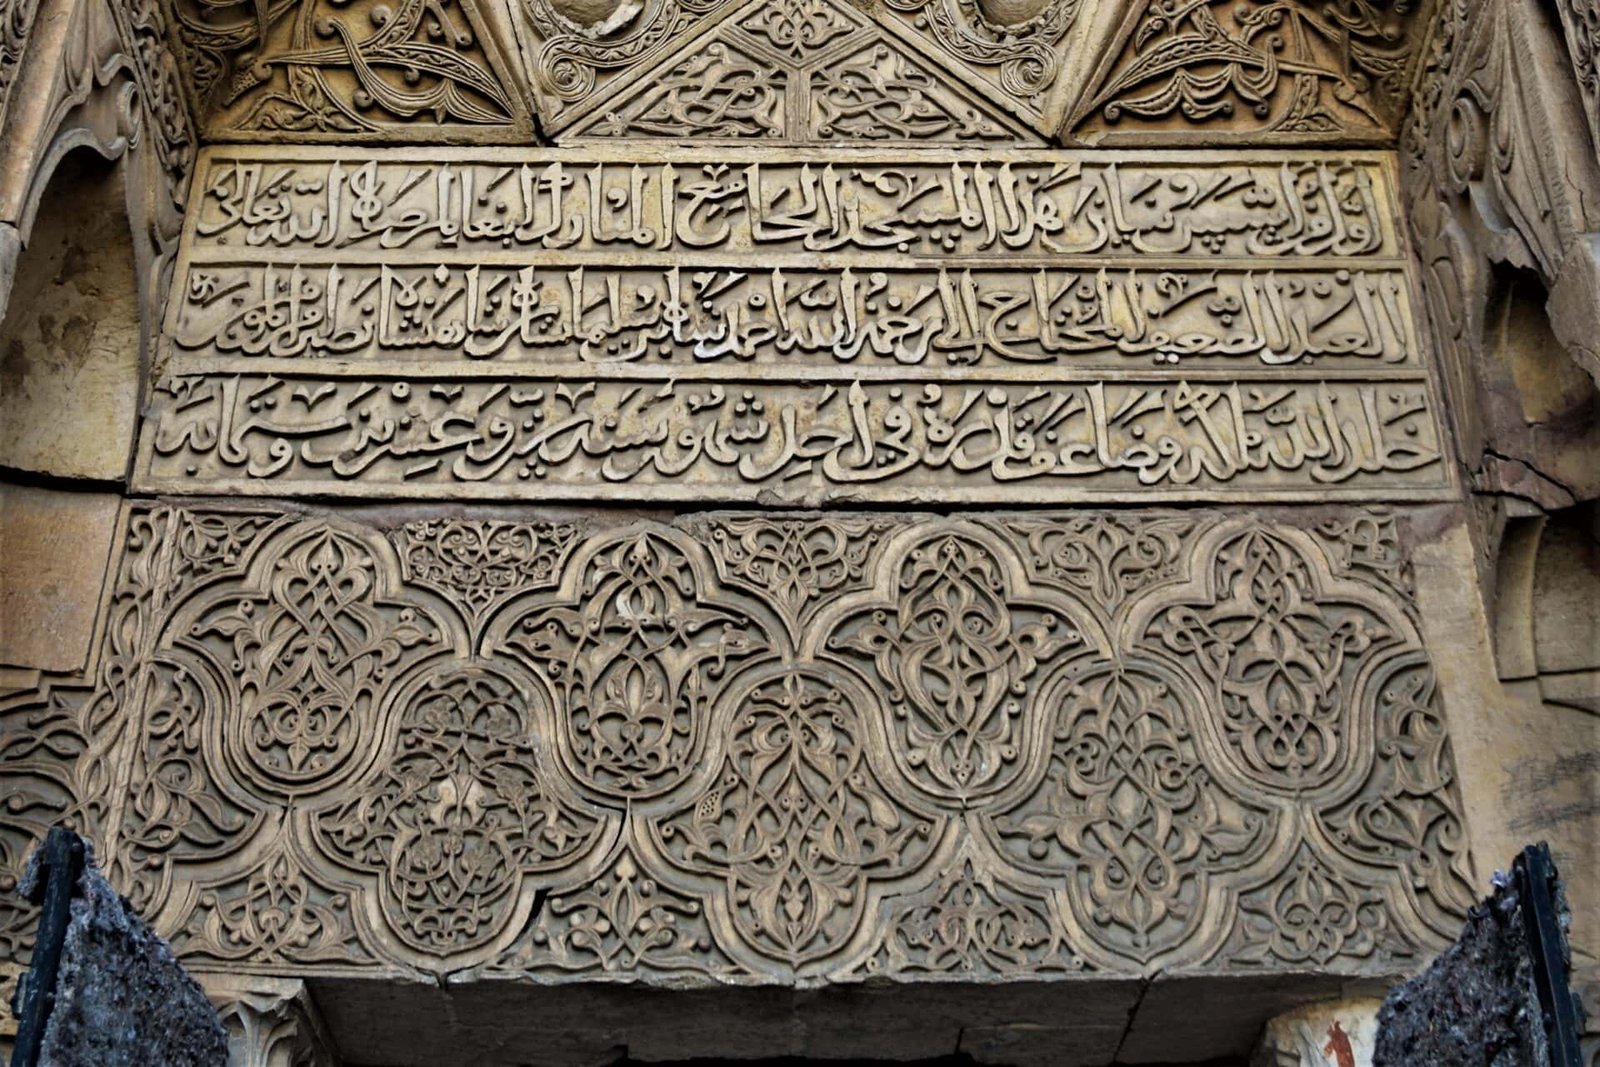 marvellous stone ornaments and Arabic writing above a side entrance to the Great Mosque of Divriği